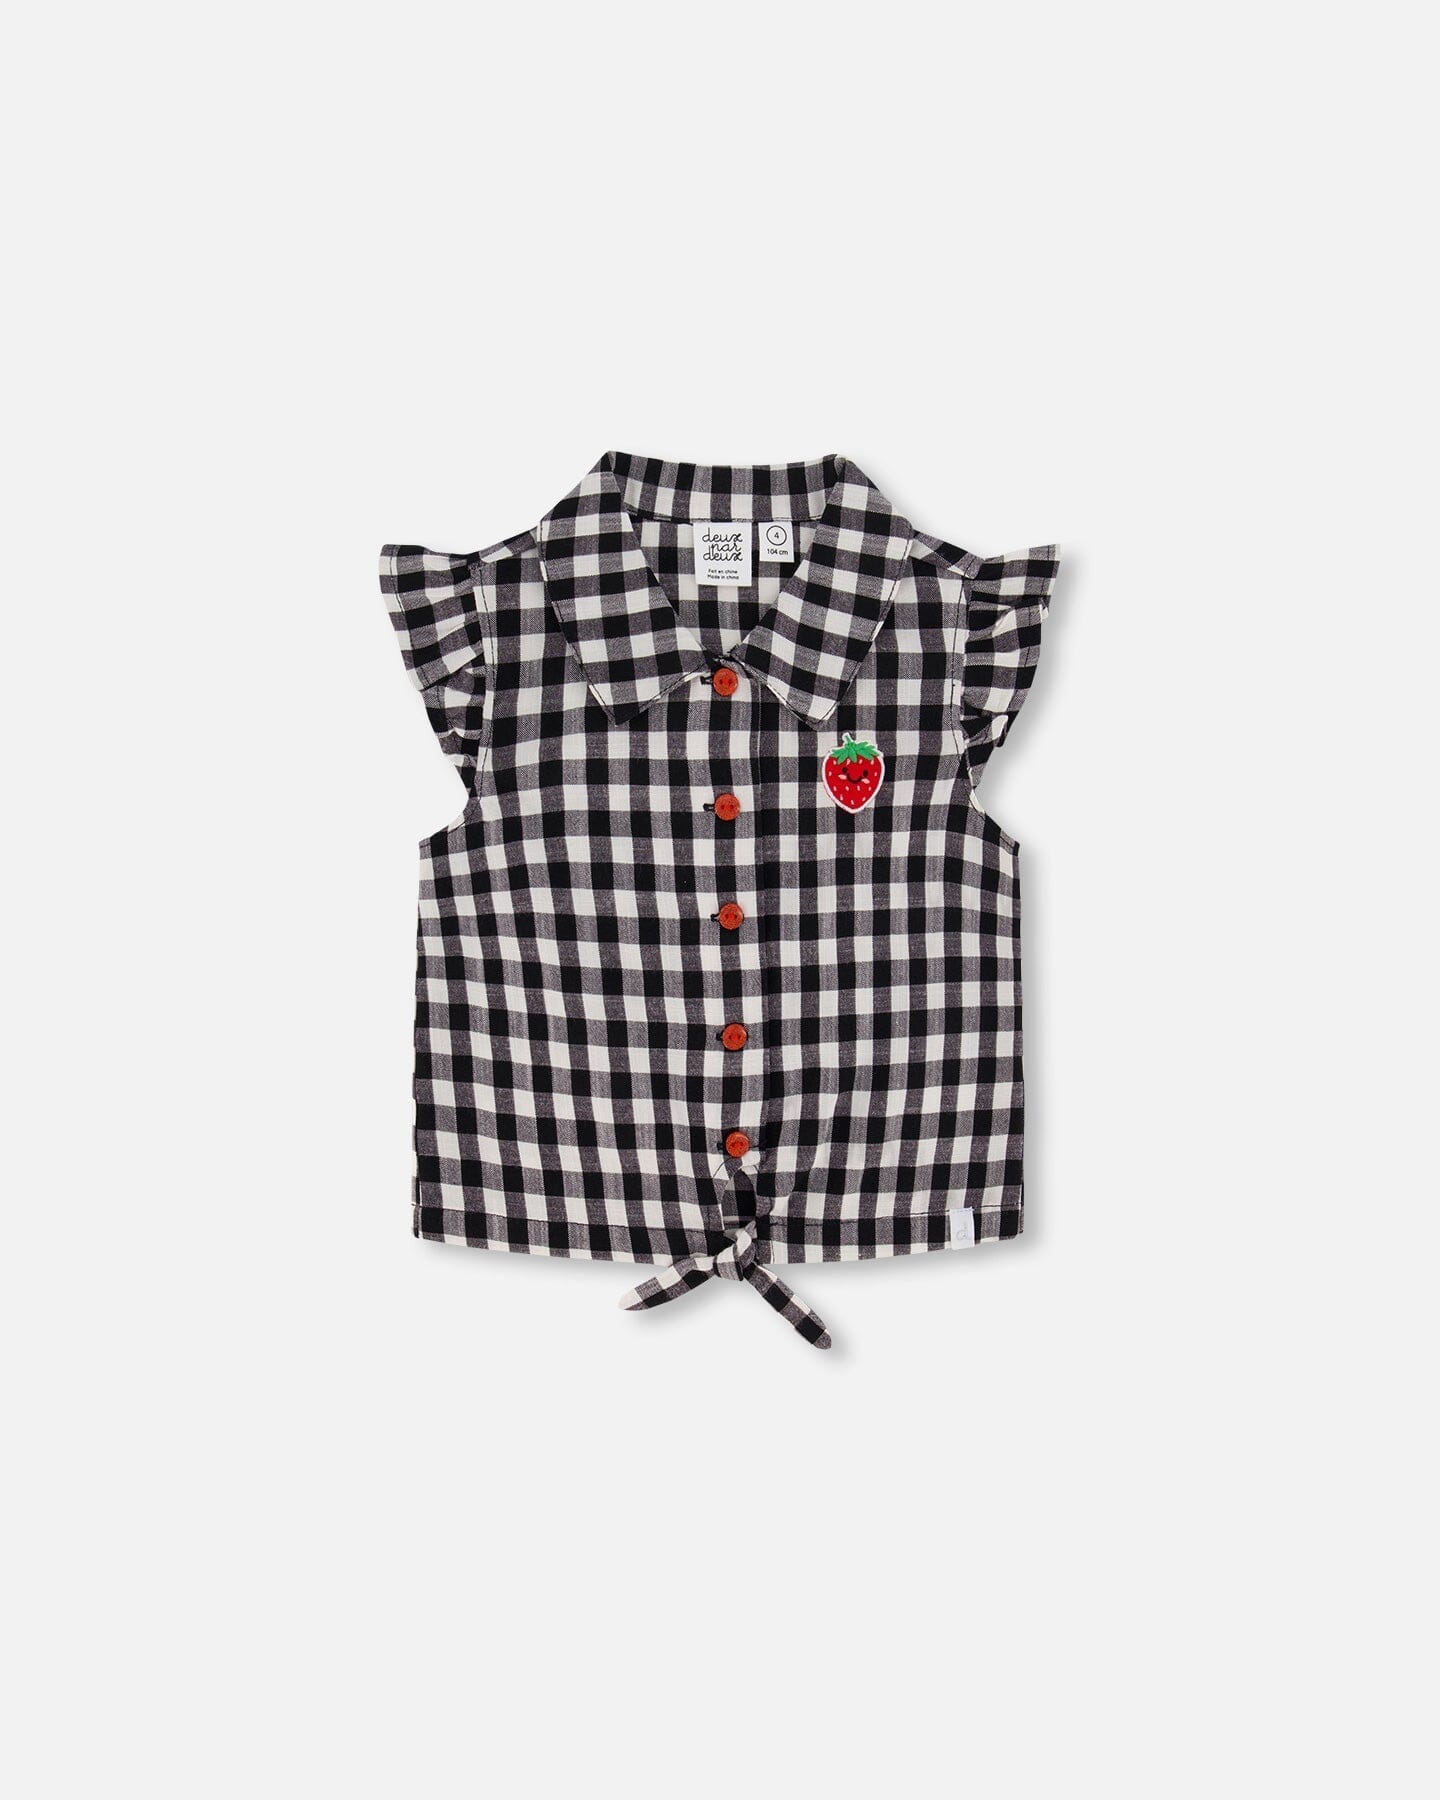 Blouse With Knot Little Vichy Black And White - F30K15_029